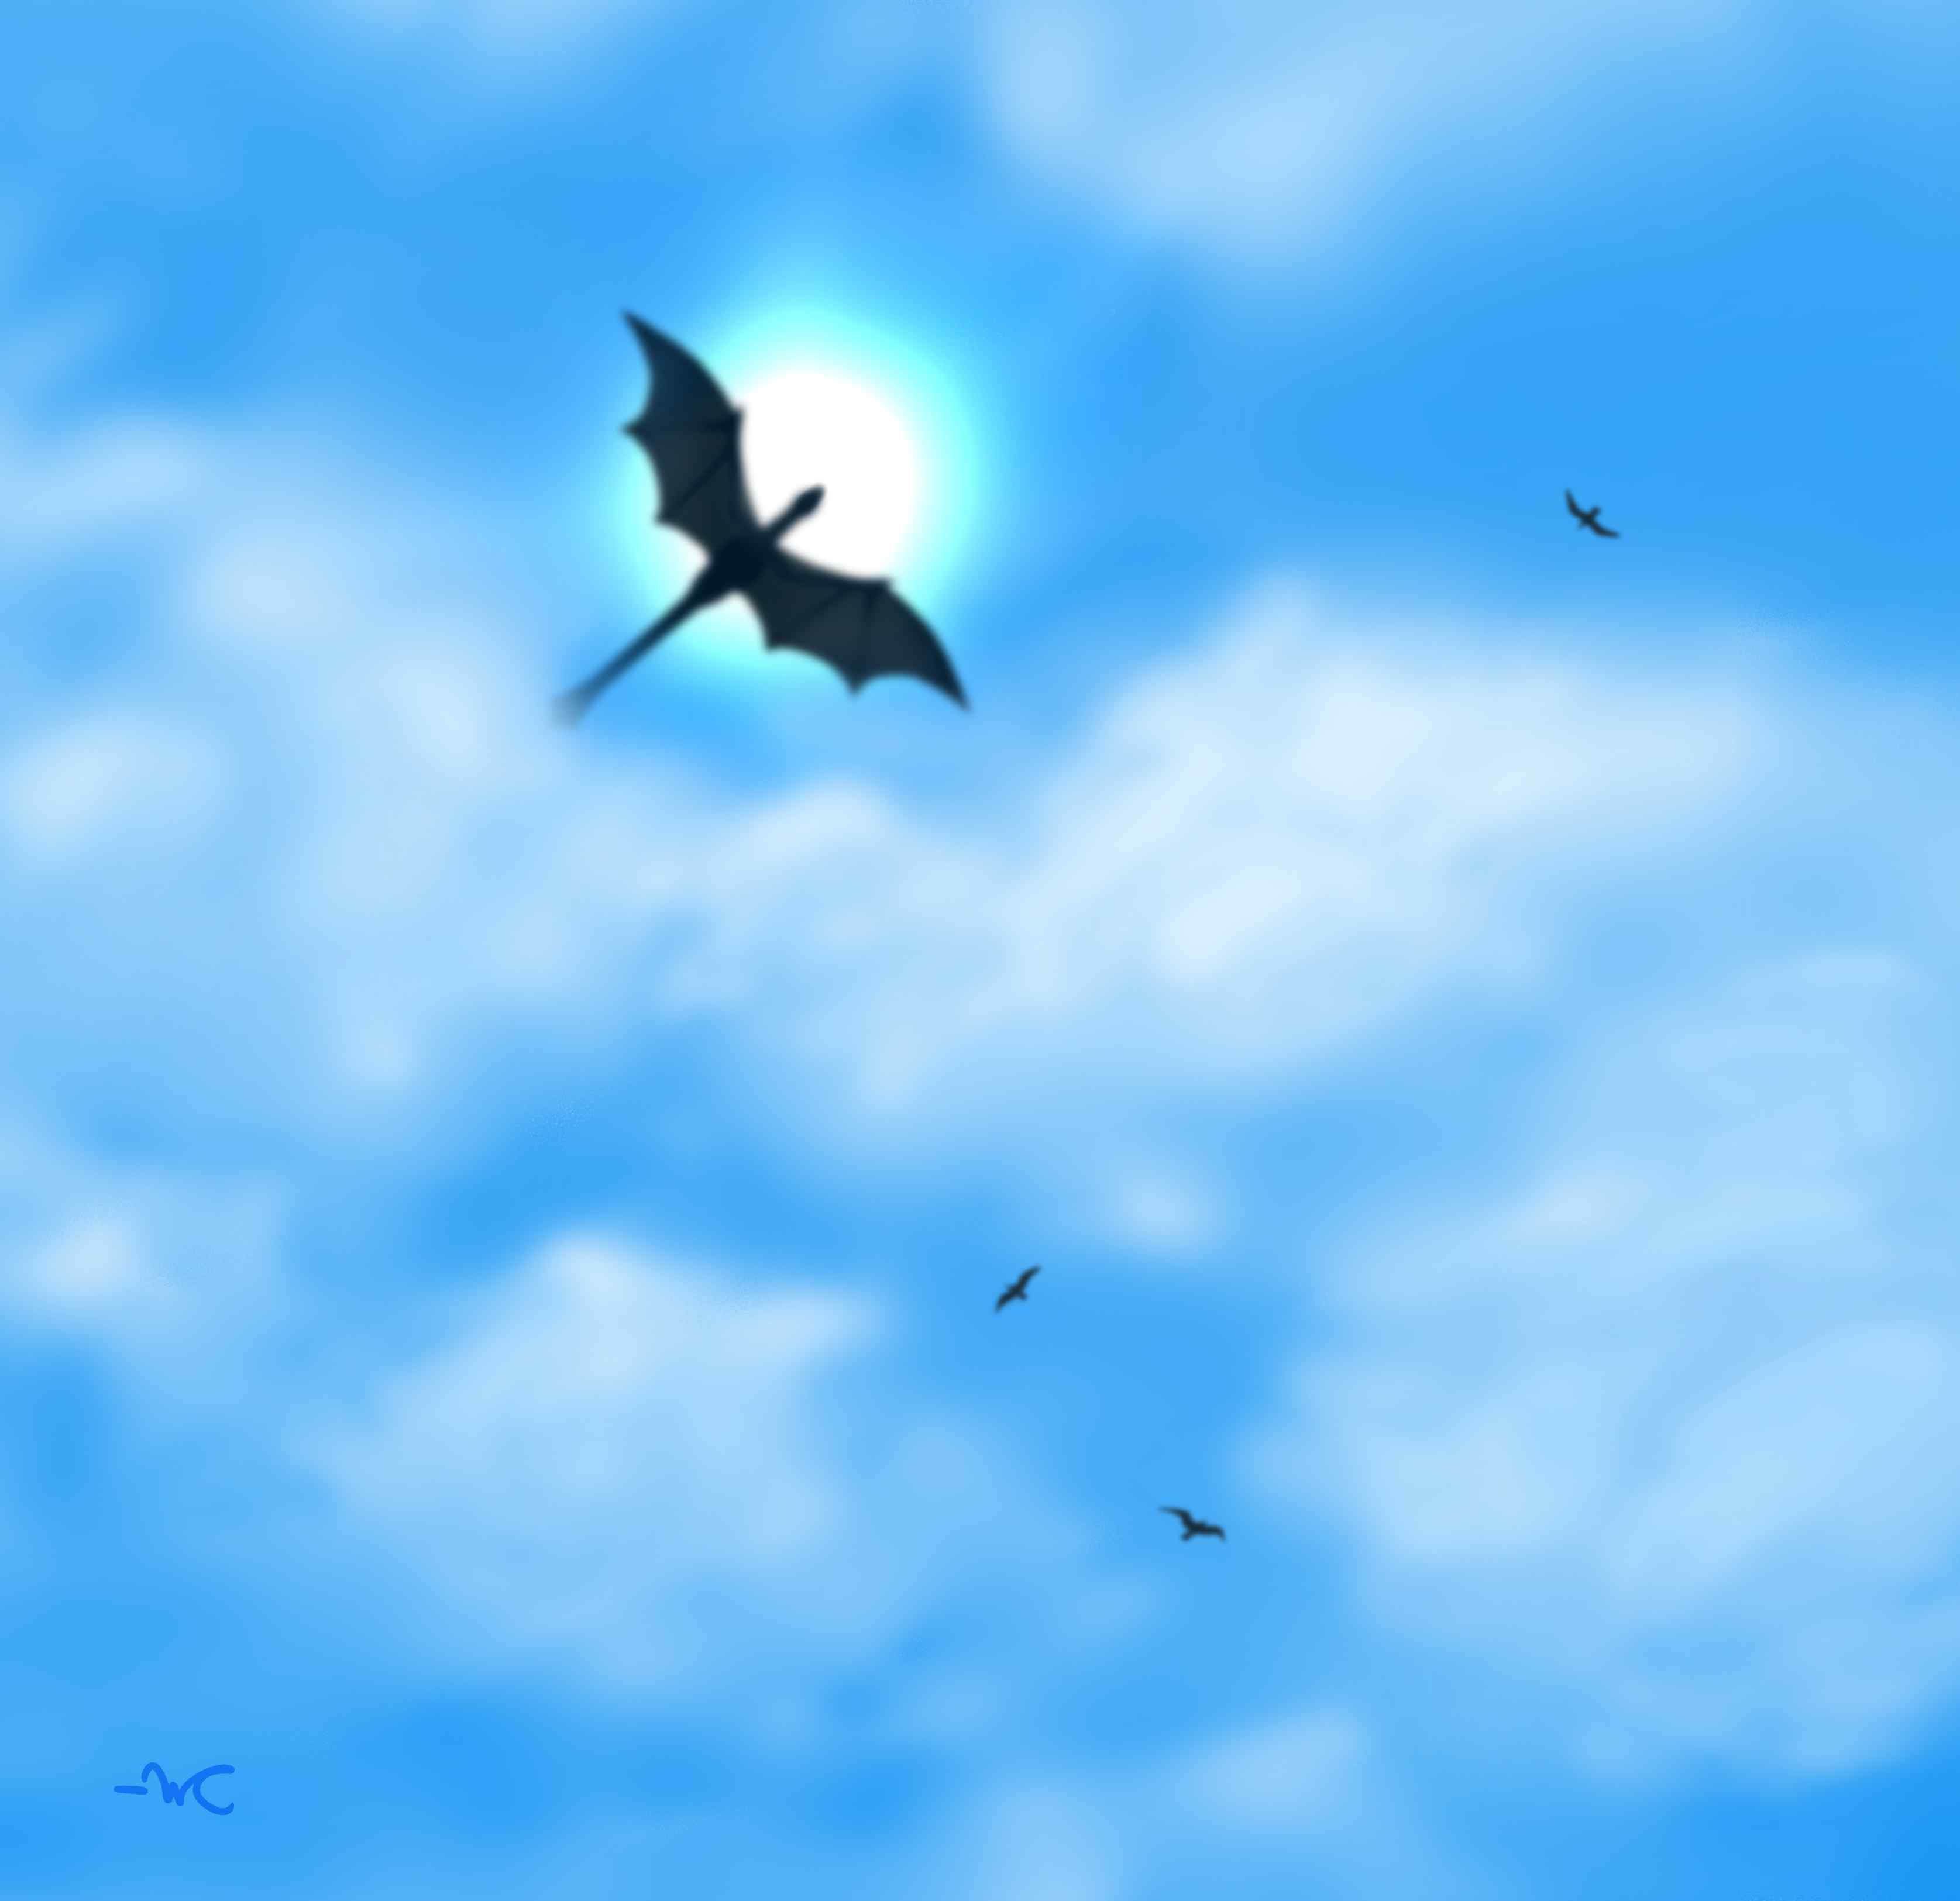 A clear sky with a dragon and birds flying in the distance.